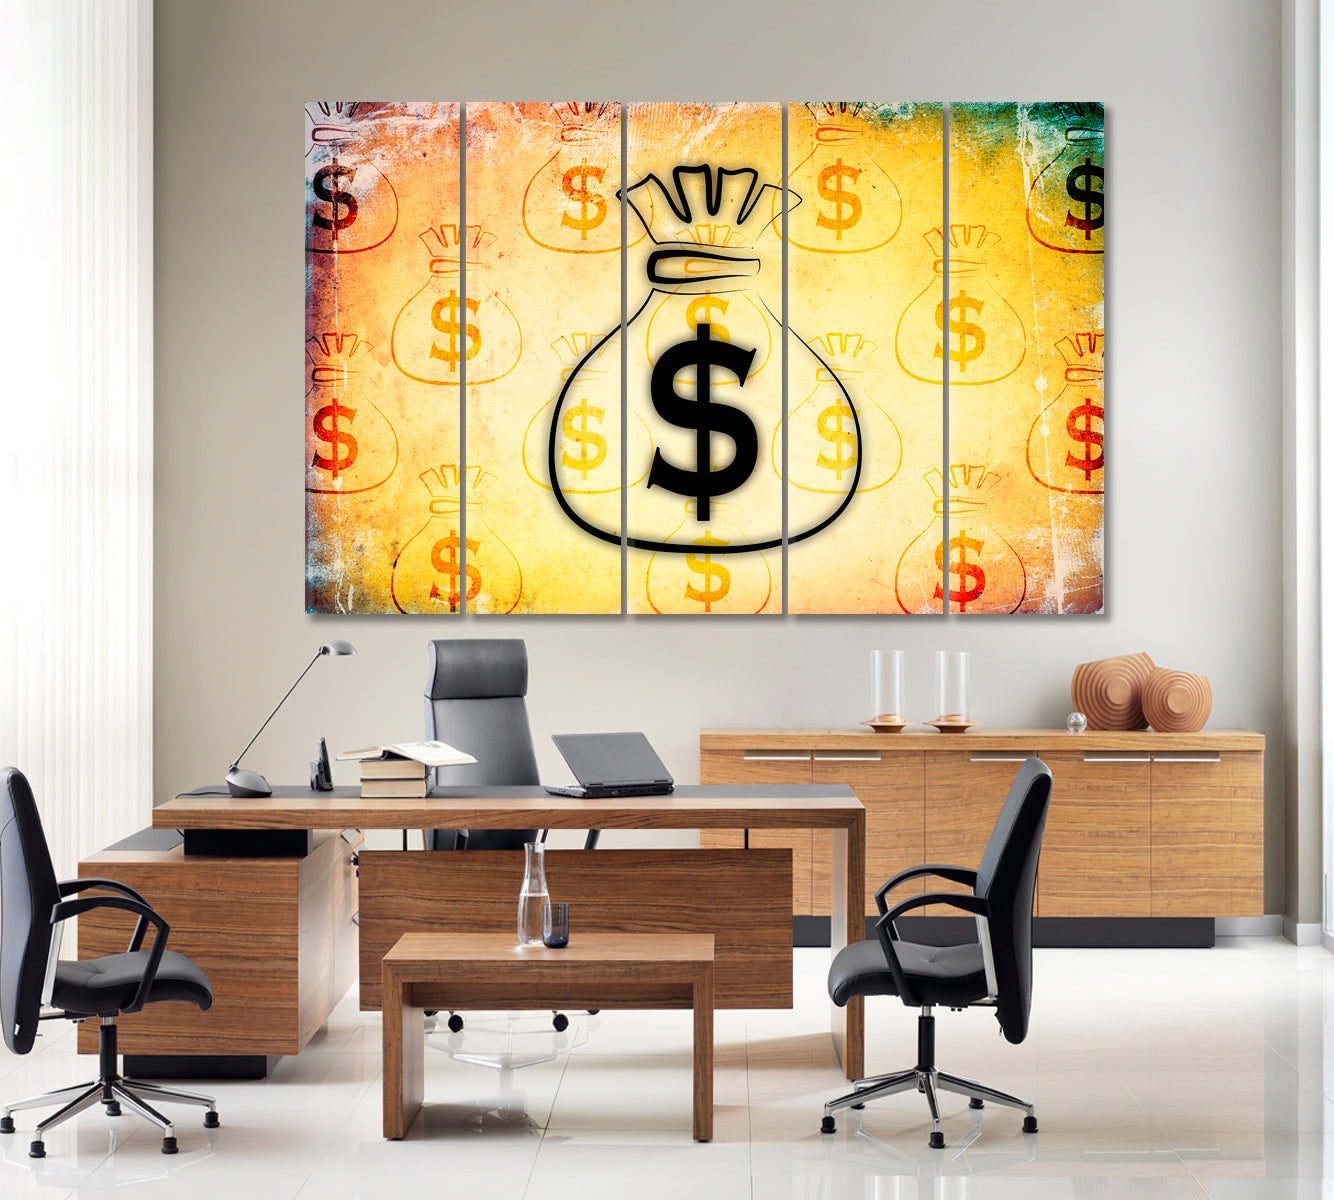 DOLLAR ICON Money Bag Business Fortune Business Concept Wall Art Artesty 5 panels 36" x 24" 